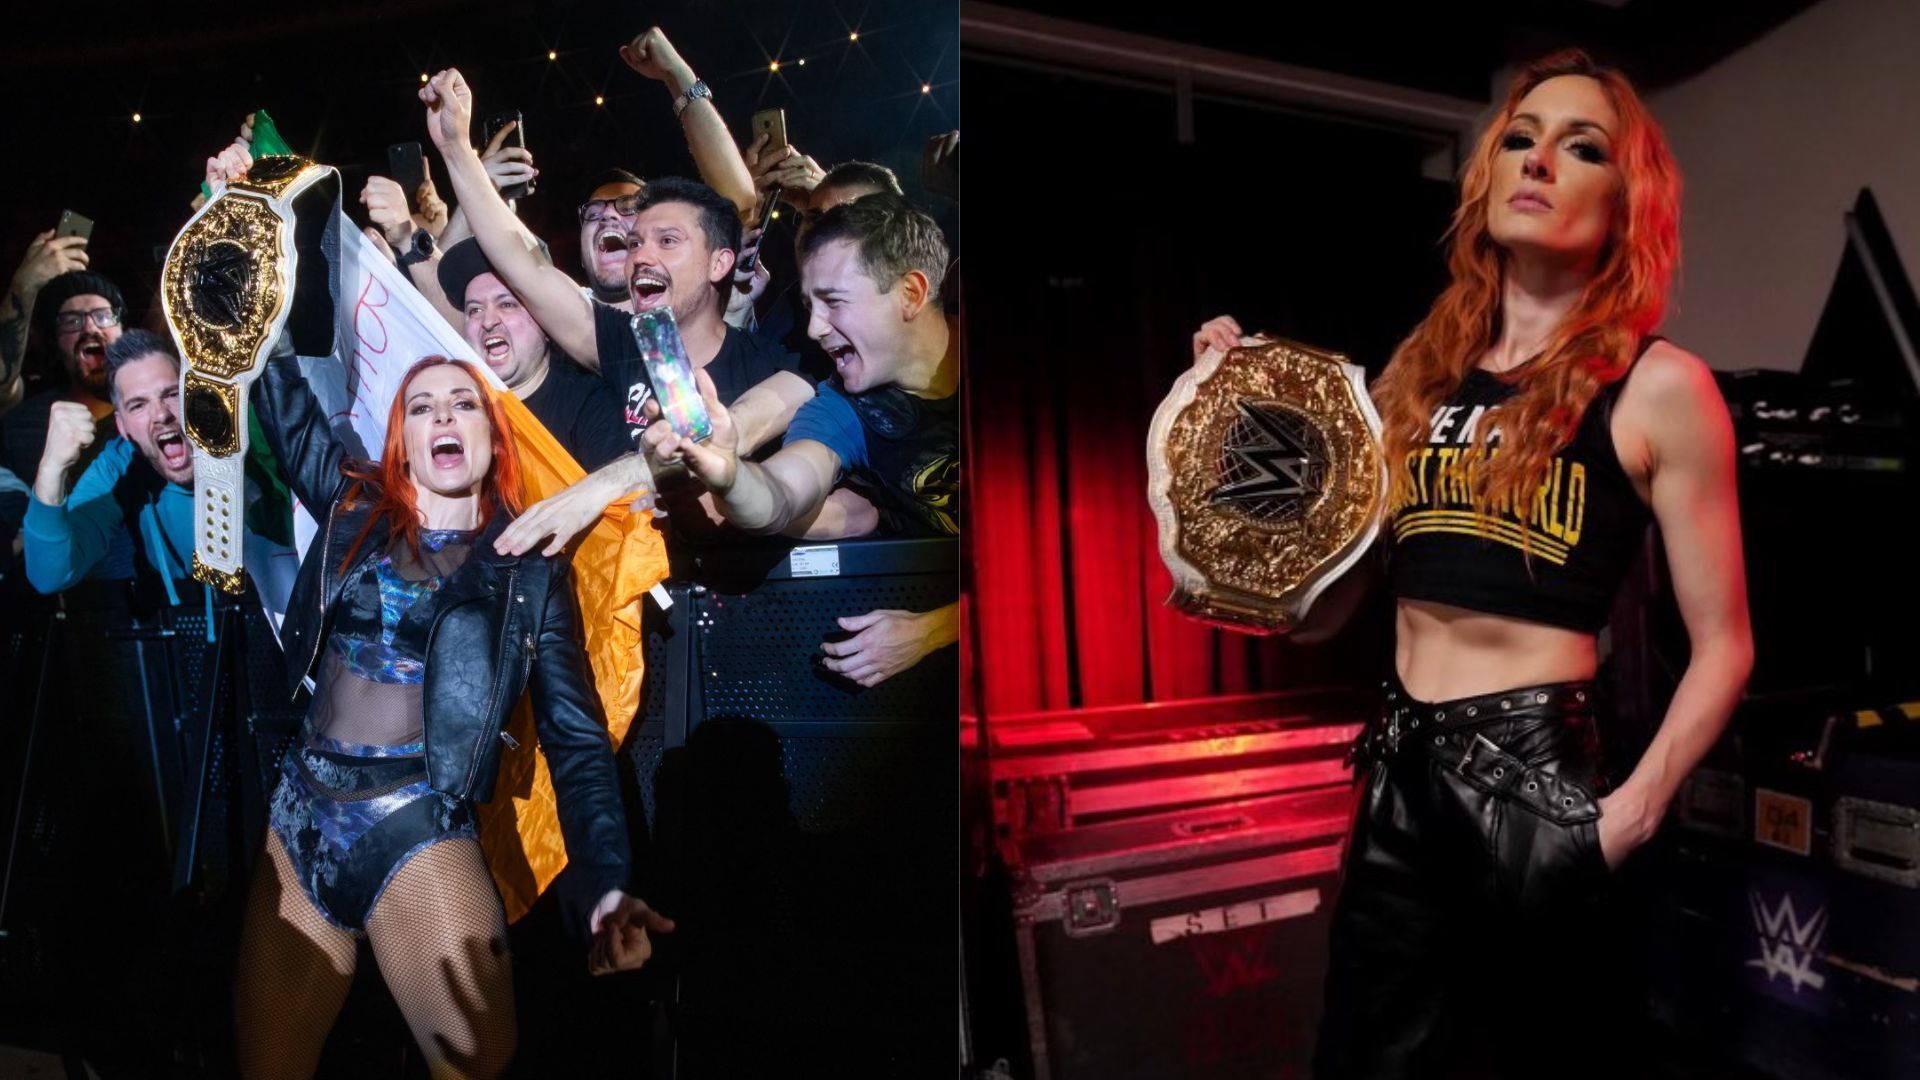 What is next for Becky Lynch in WWE?